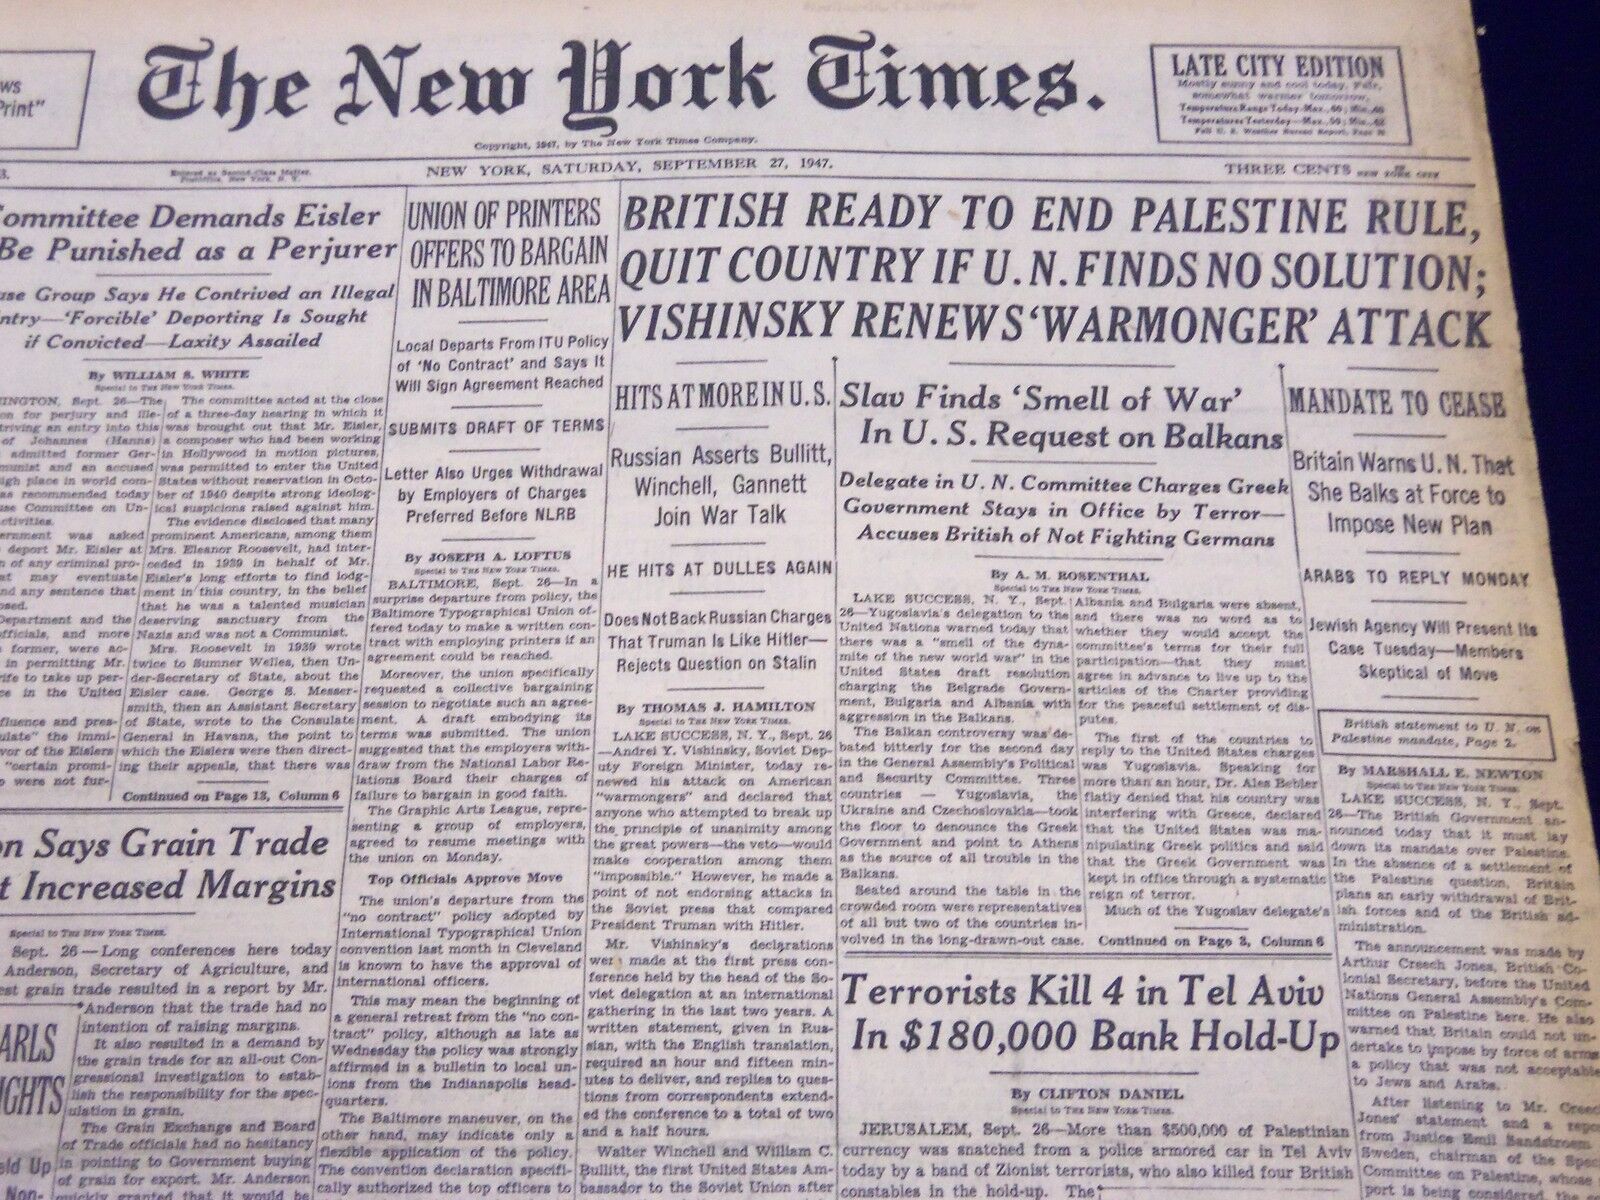 1947 SEPT 27 NEW YORK TIMES - BRITISH READY TO END PALESTINE RULE - NT 177